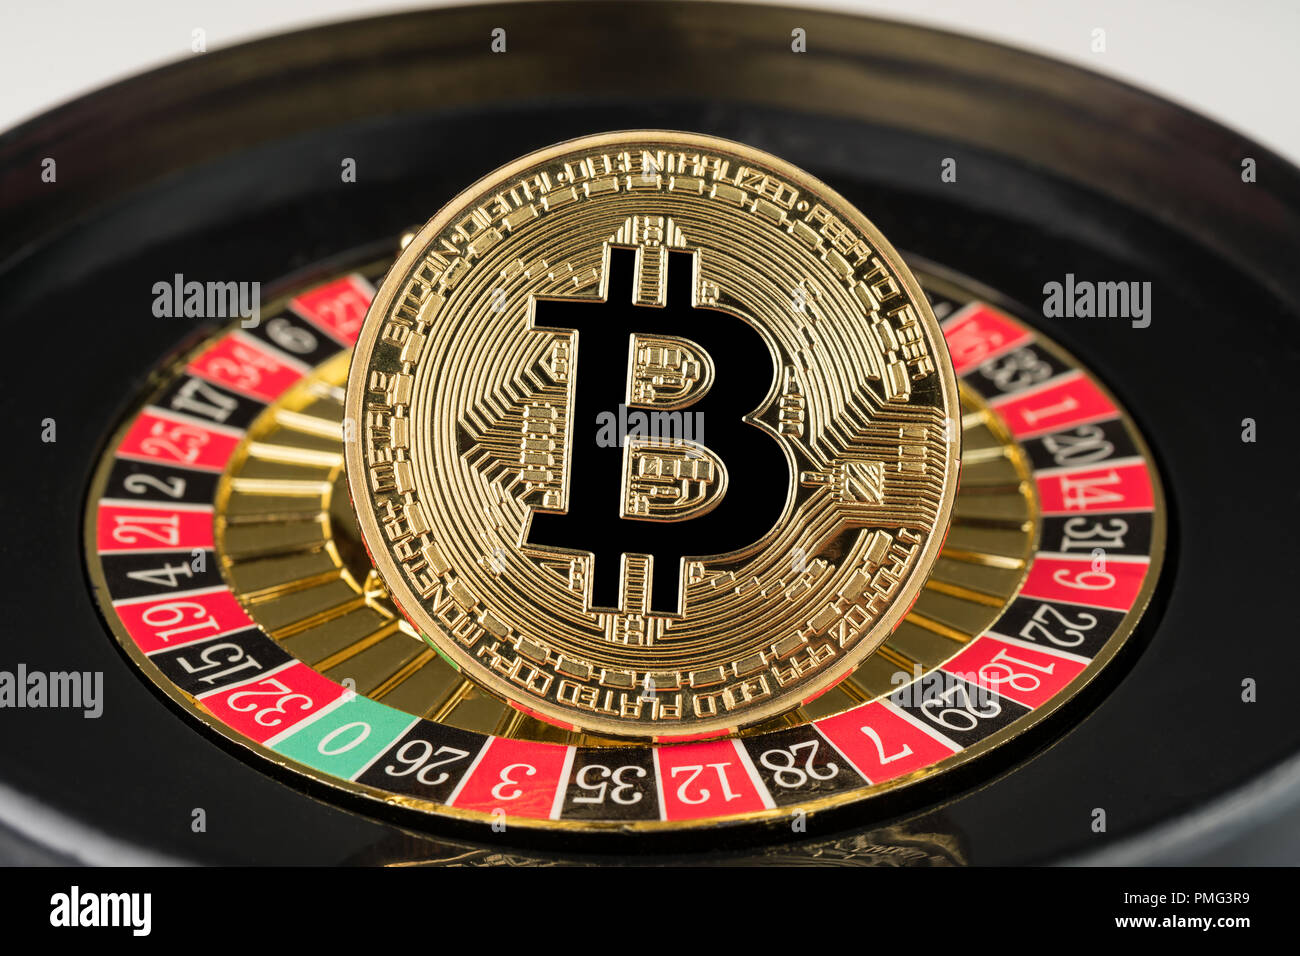 bitcoincasino - So Simple Even Your Kids Can Do It